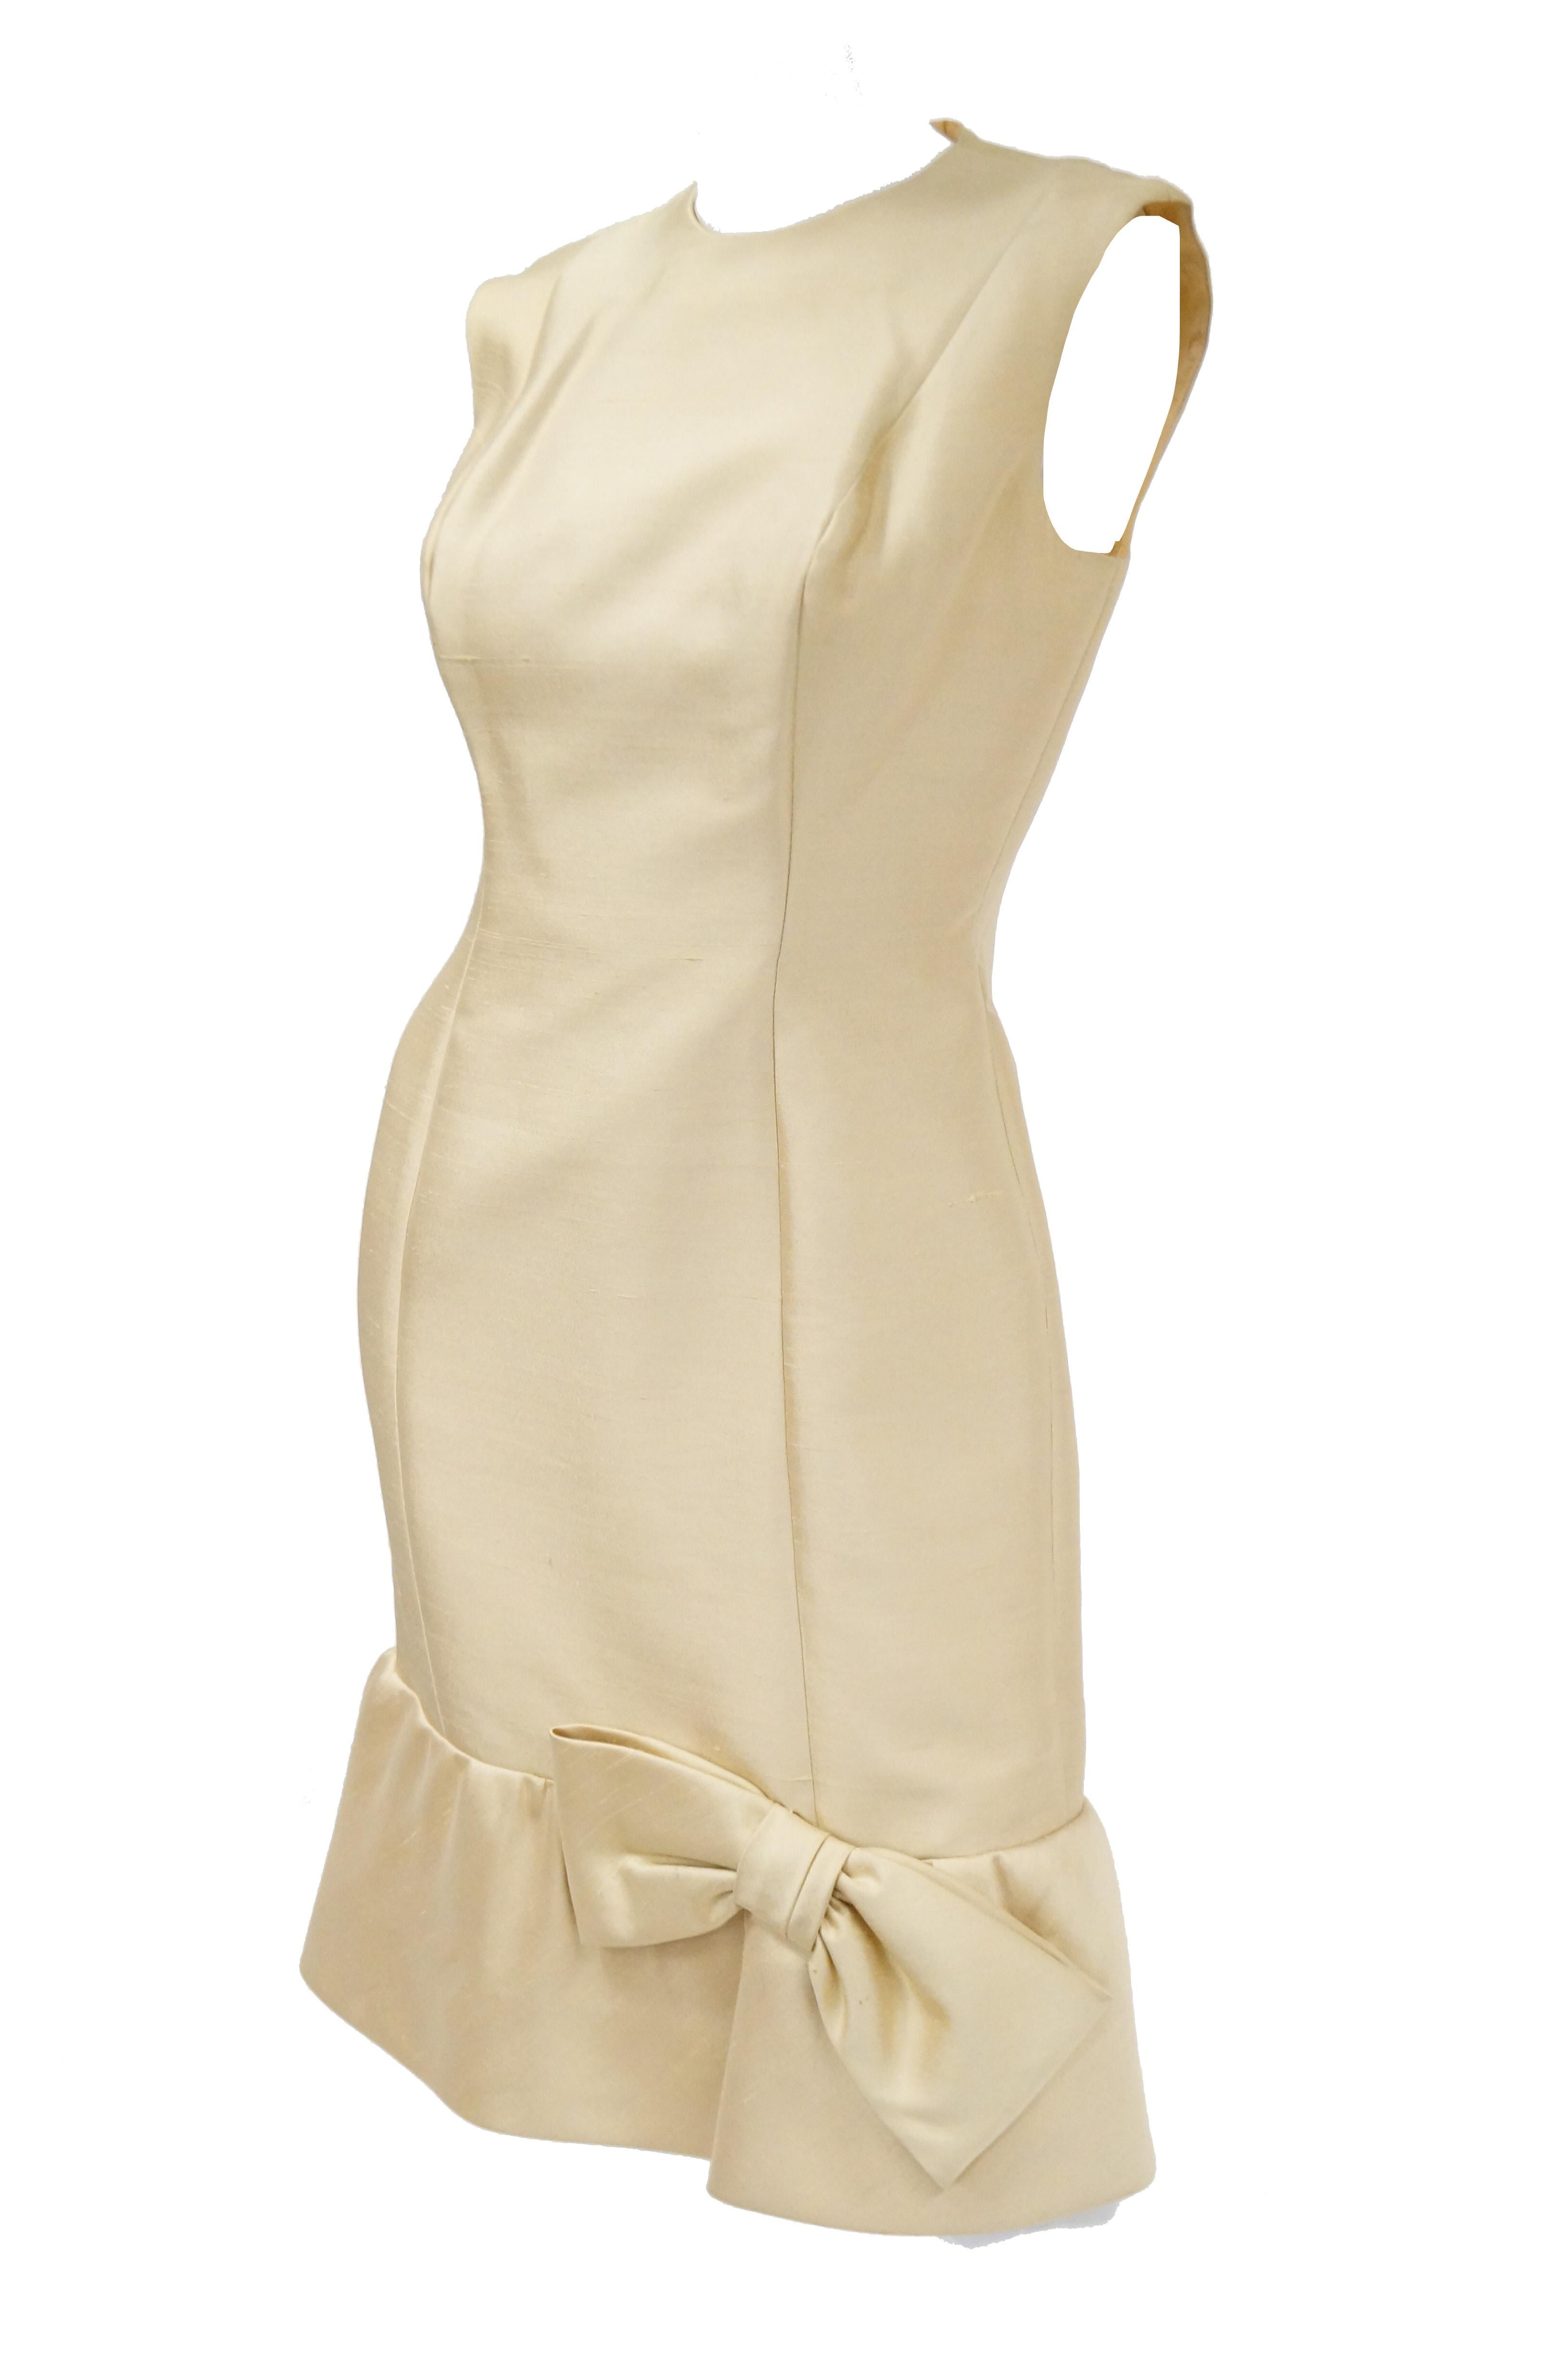 Women's 1960s Mardi Gras Champagne Gold Cocktail Sheath Dress with Bow Detail For Sale